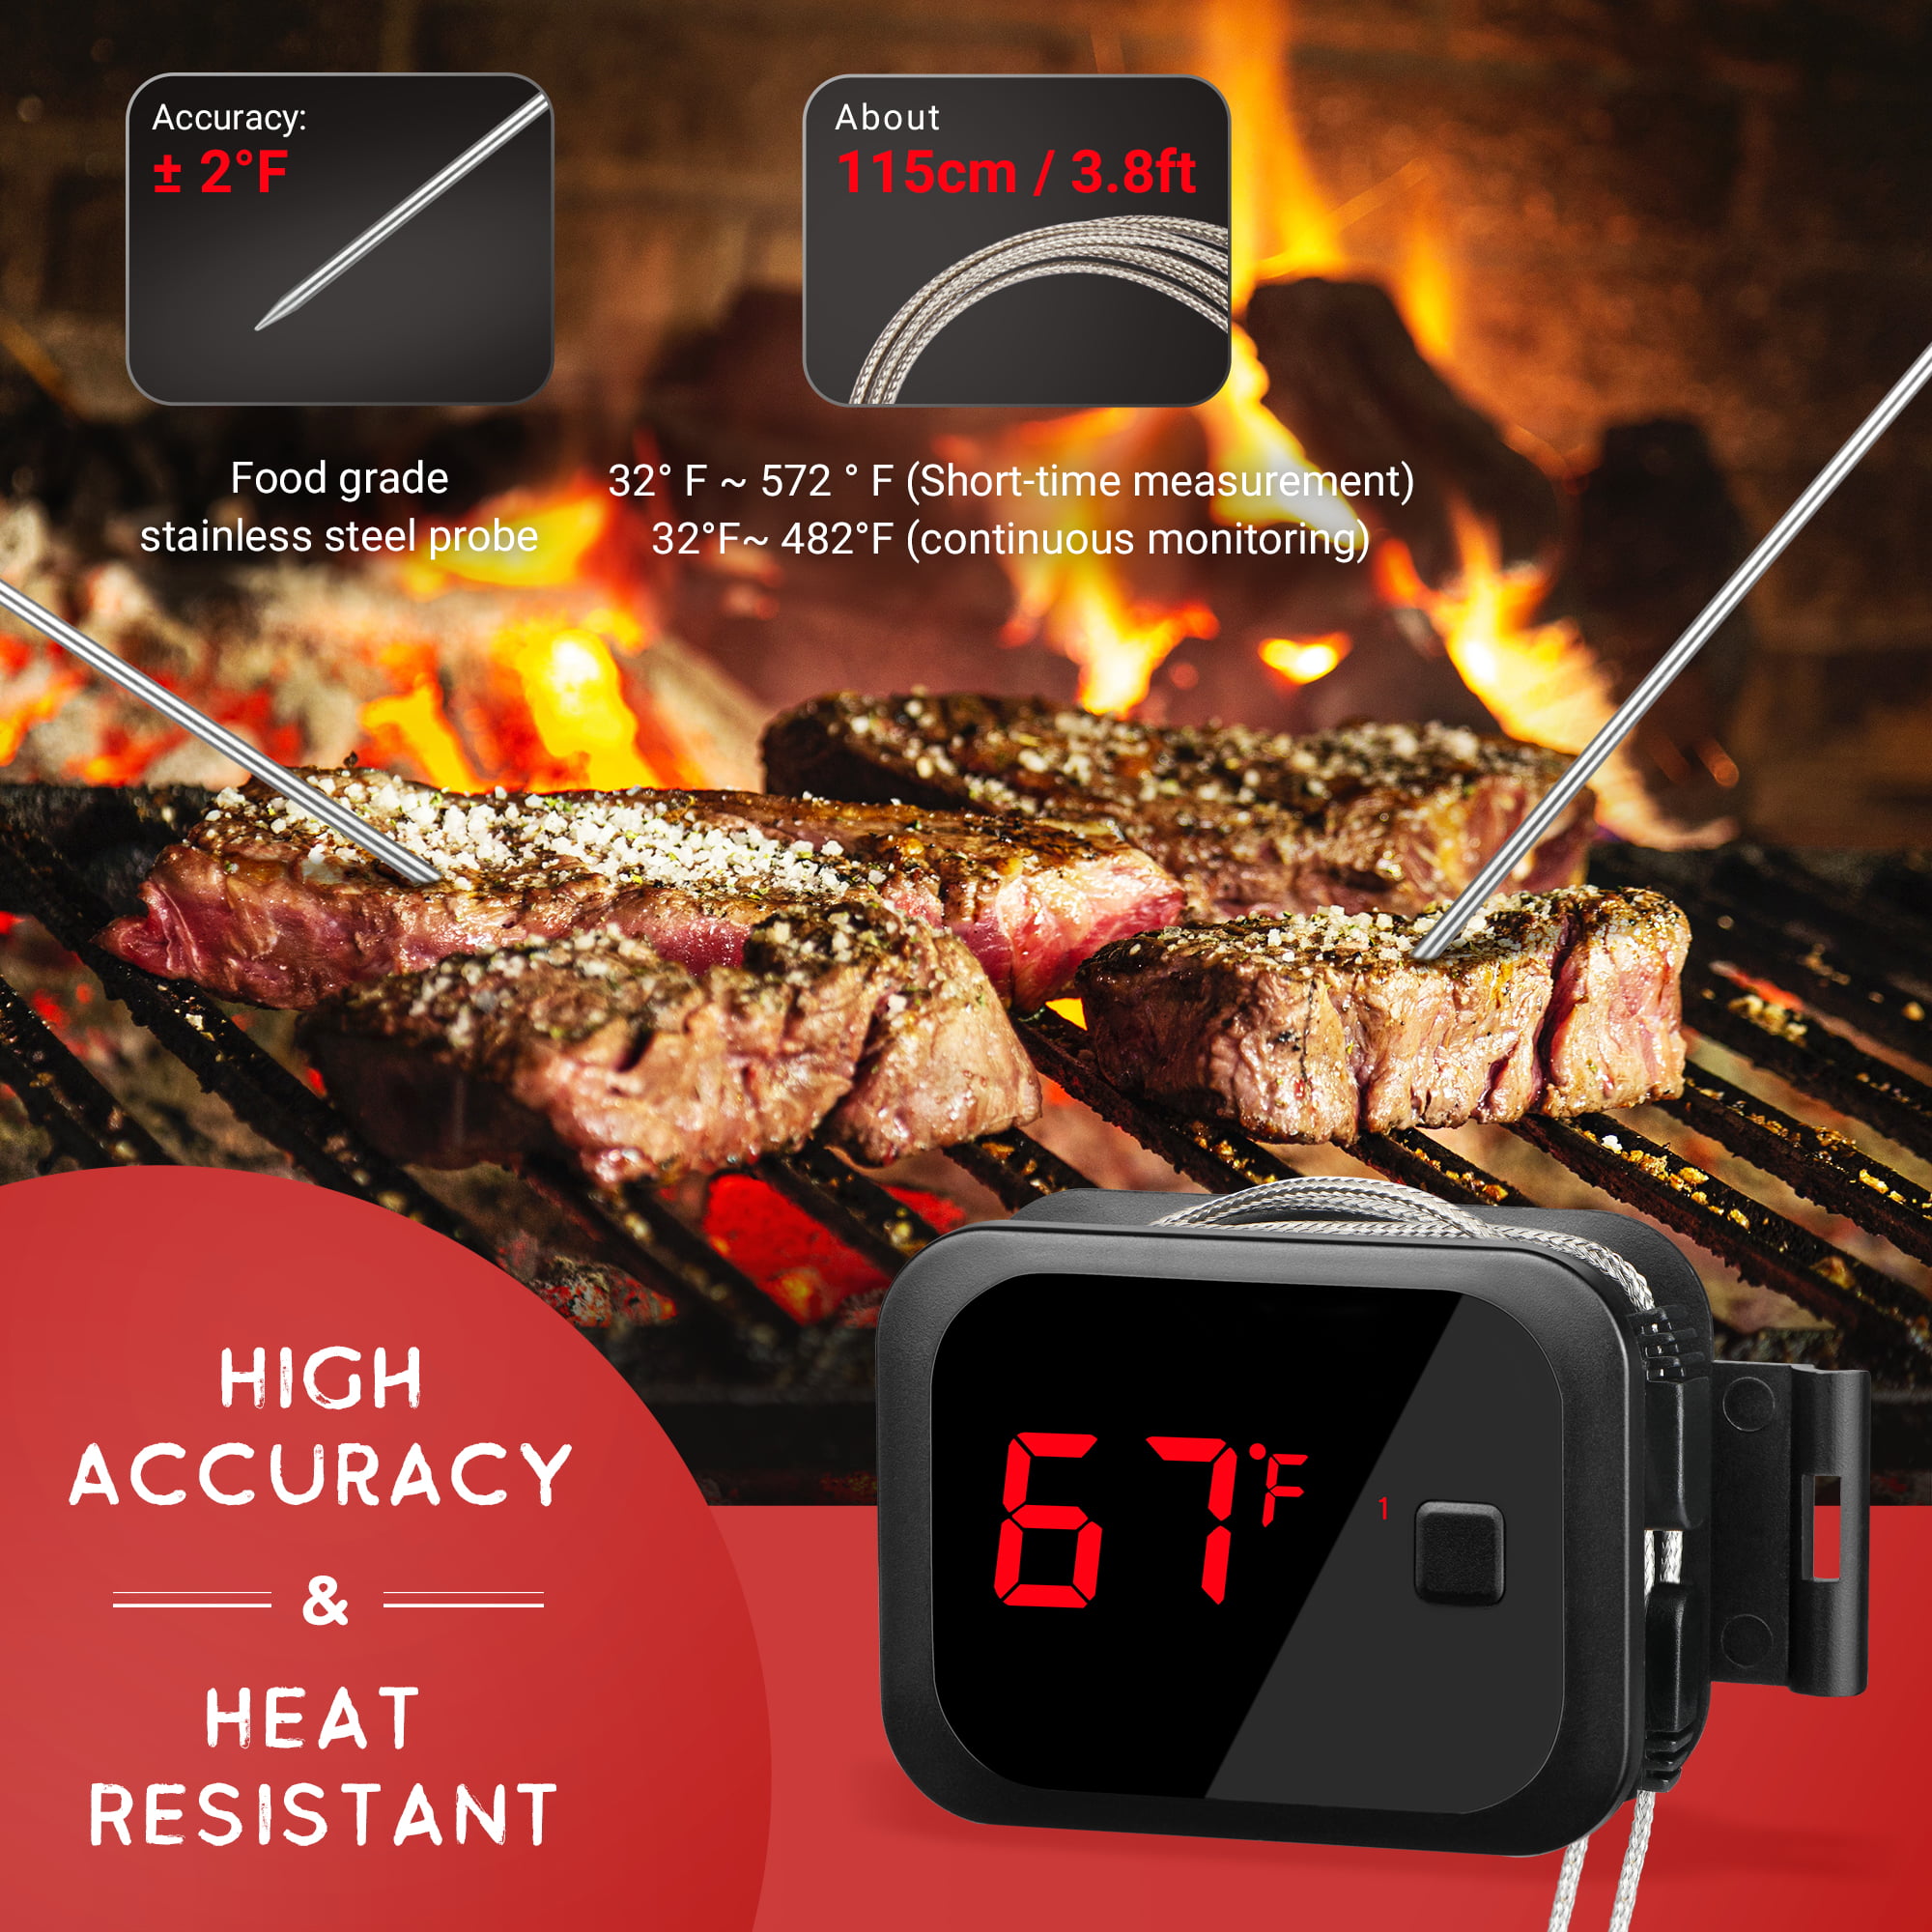 Inkbird IBT-2X Digital BBQ Grill Bluetooth Smoker Thermometer , 150 feet  Wireless Cooking Meat Thermometer with Timer and Alarm for Kitchen Oven  Barbecue, Dual Probes 